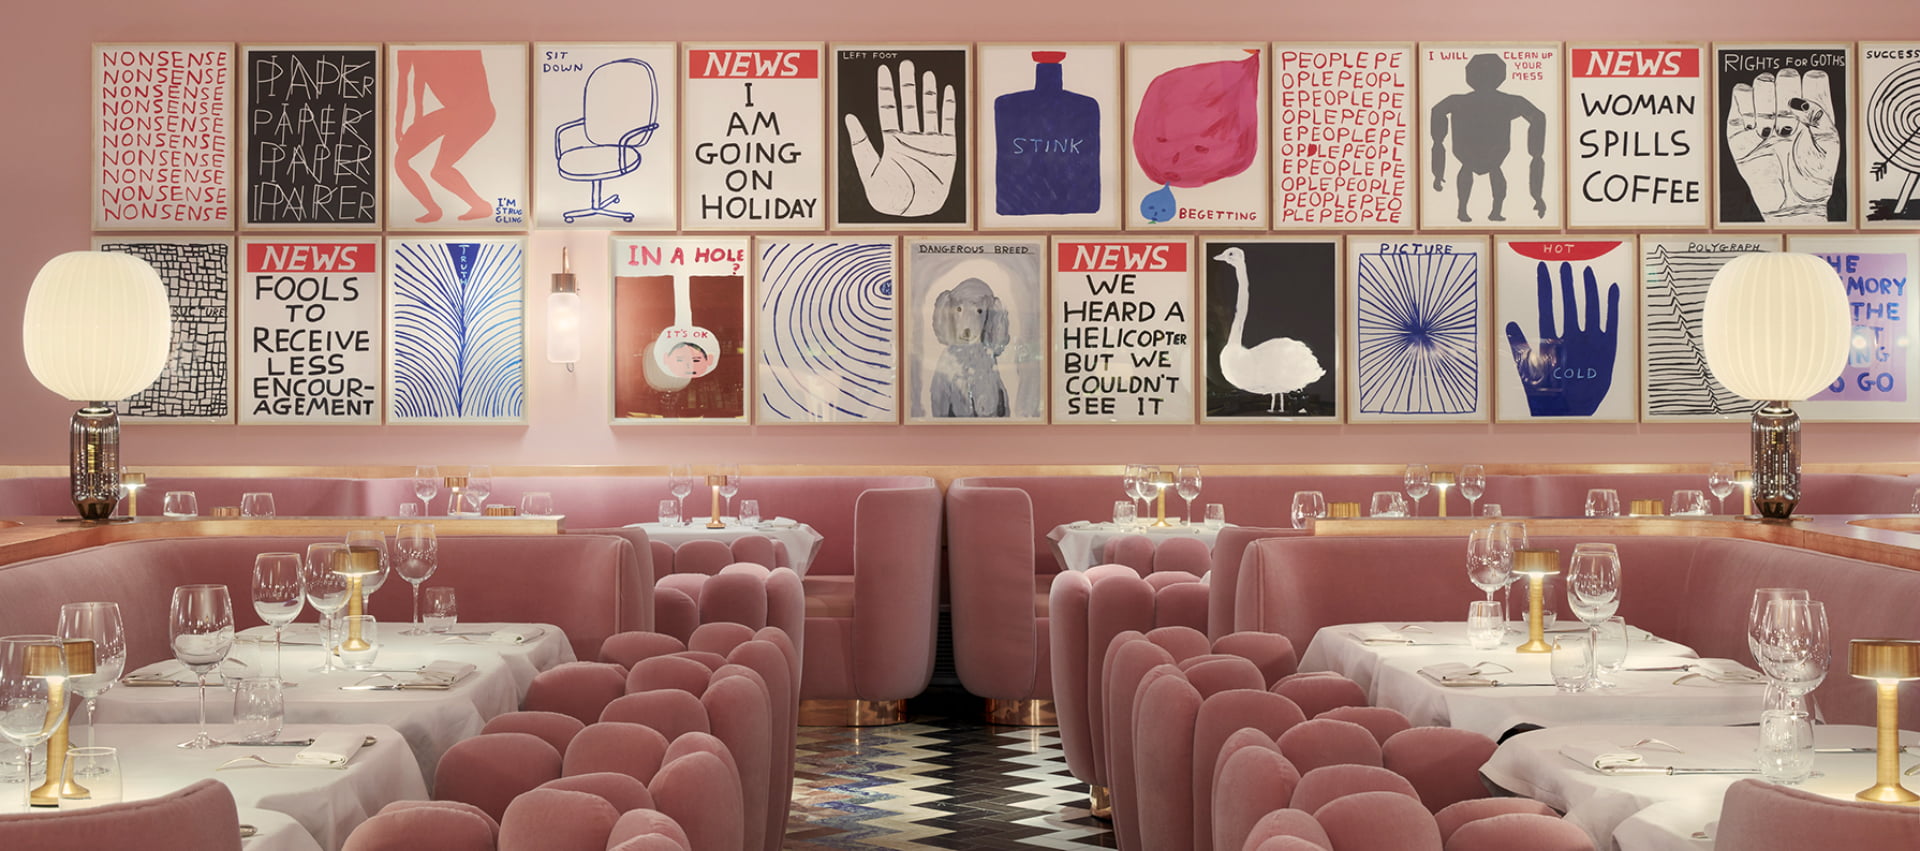 Sketch London | Iconic, Quirky & Beautiful Mayfair Restaurant & Bar